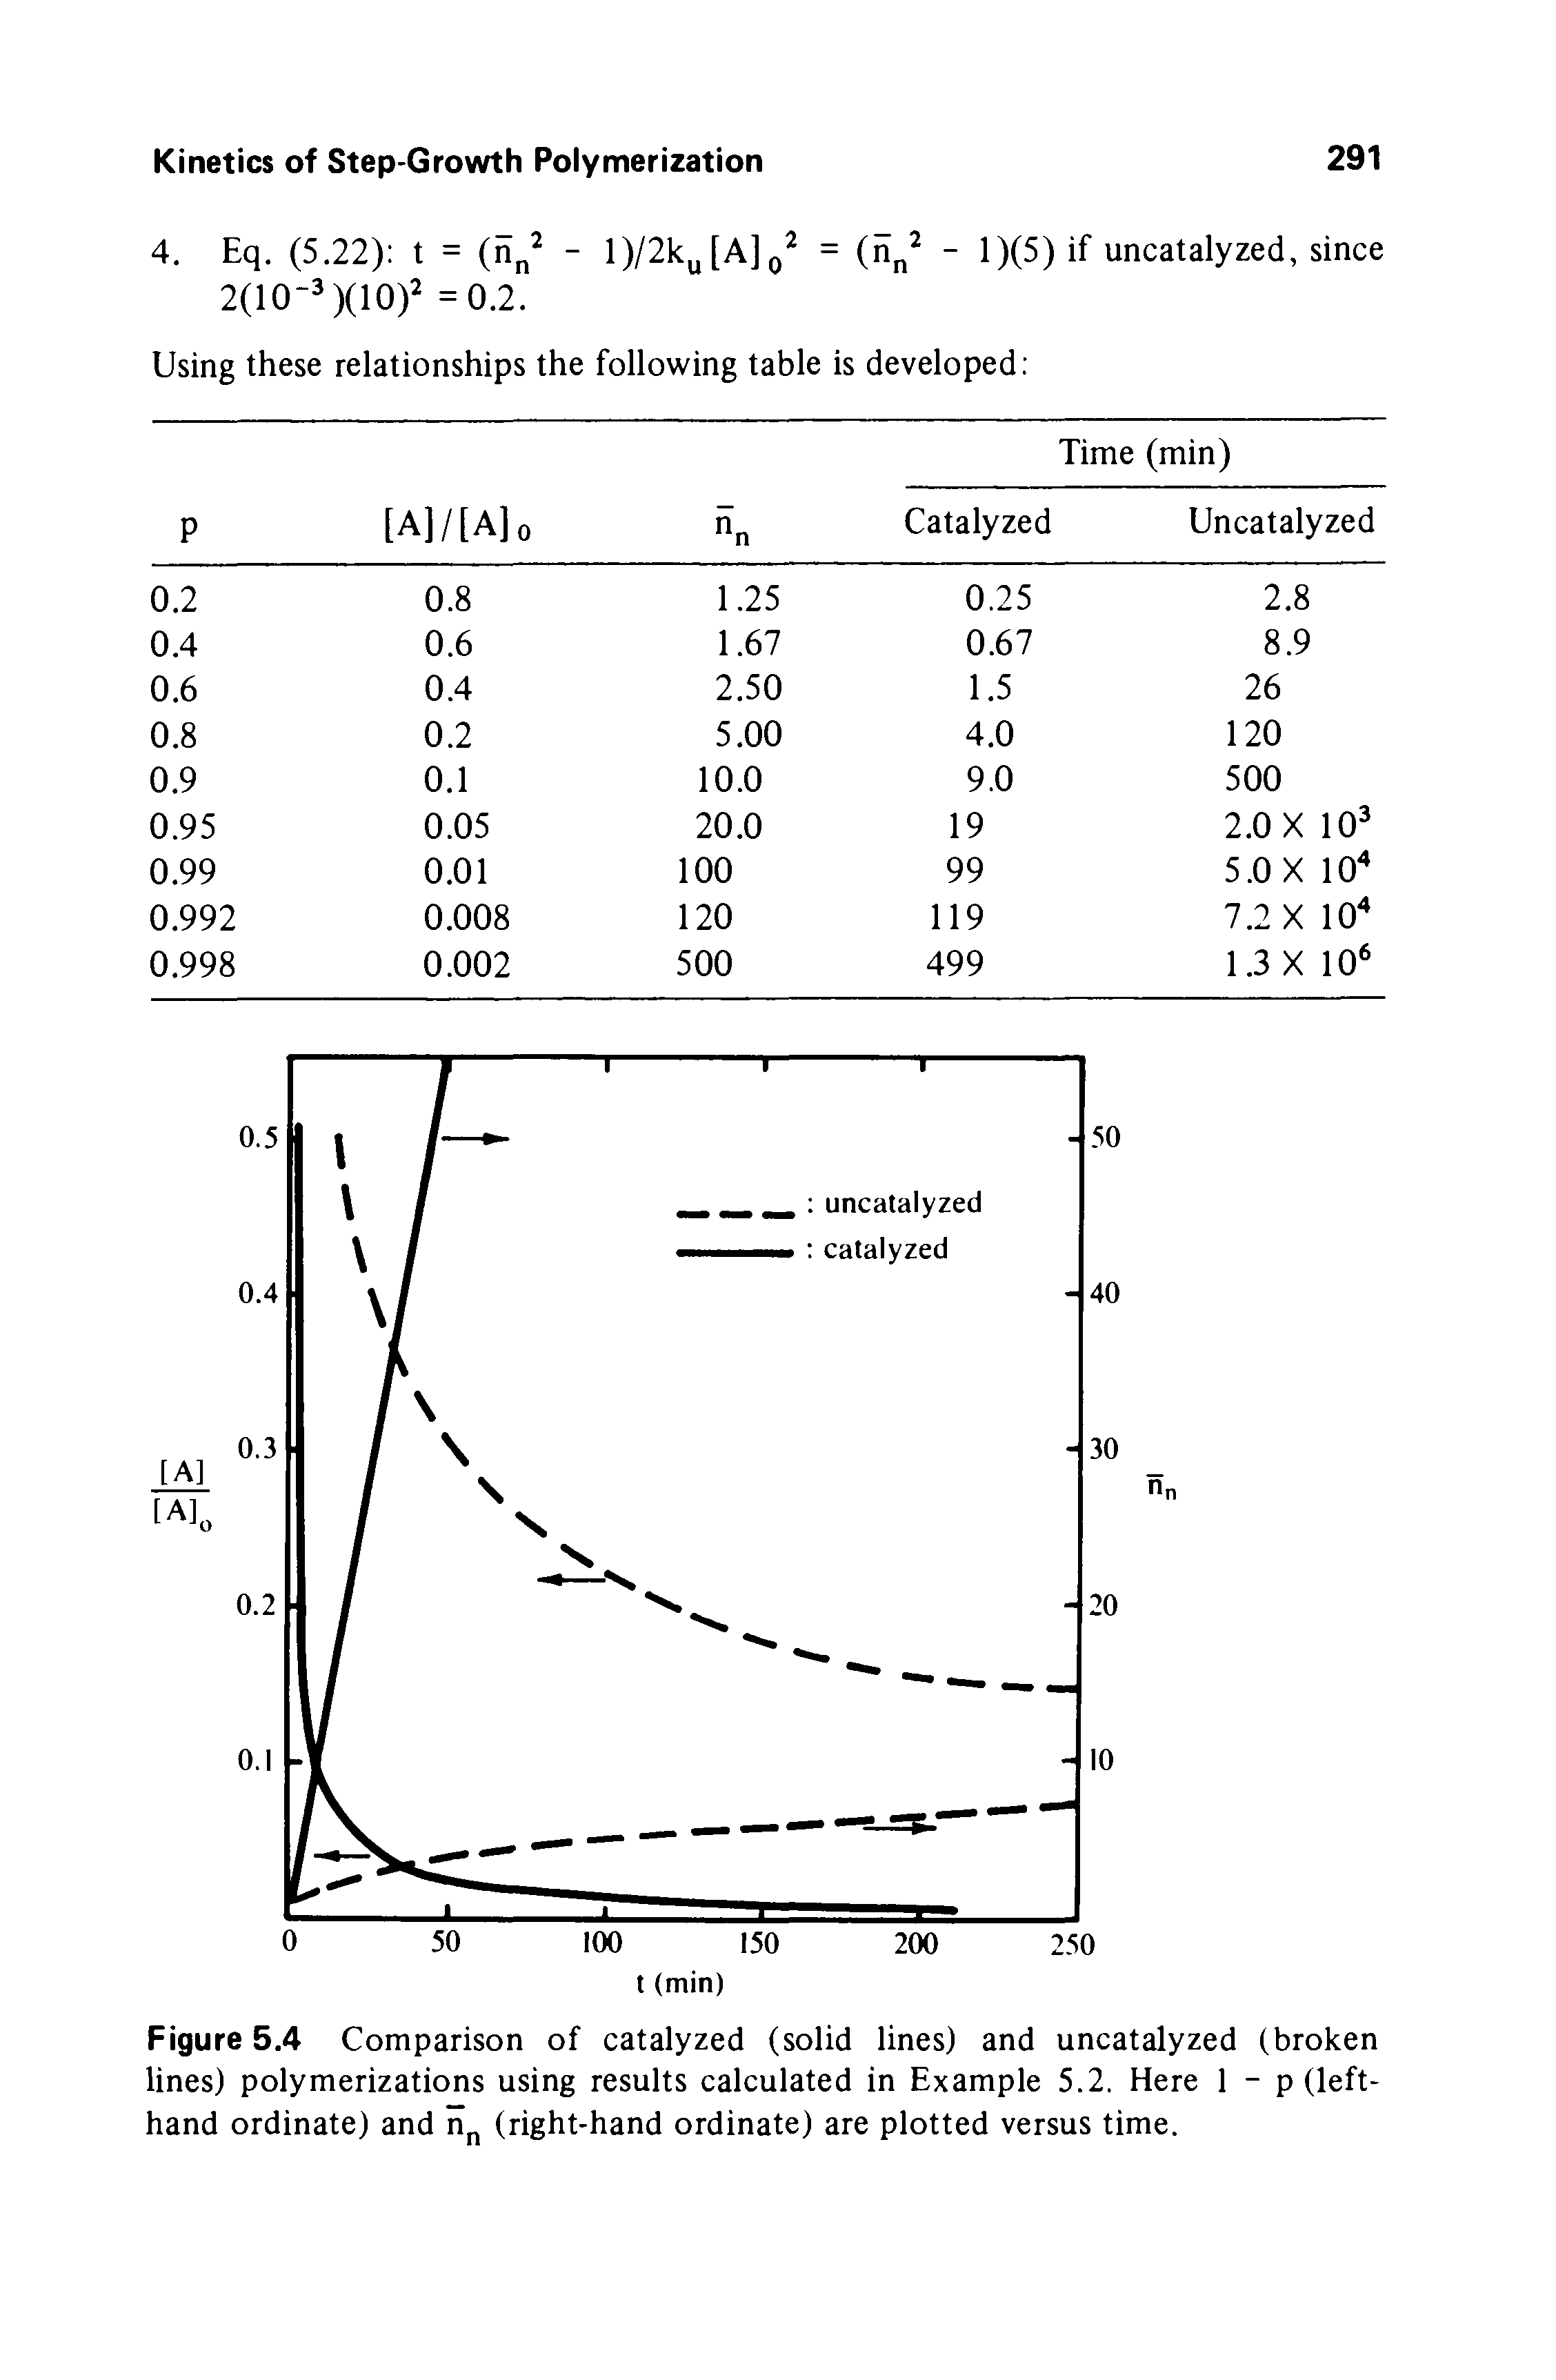 Figure 5.4 Comparison of catalyzed (solid lines) and uncatalyzed (broken lines) polymerizations using results calculated in Example 5.2. Here 1 - p (left-hand ordinate) and n (right-hand ordinate) are plotted versus time.